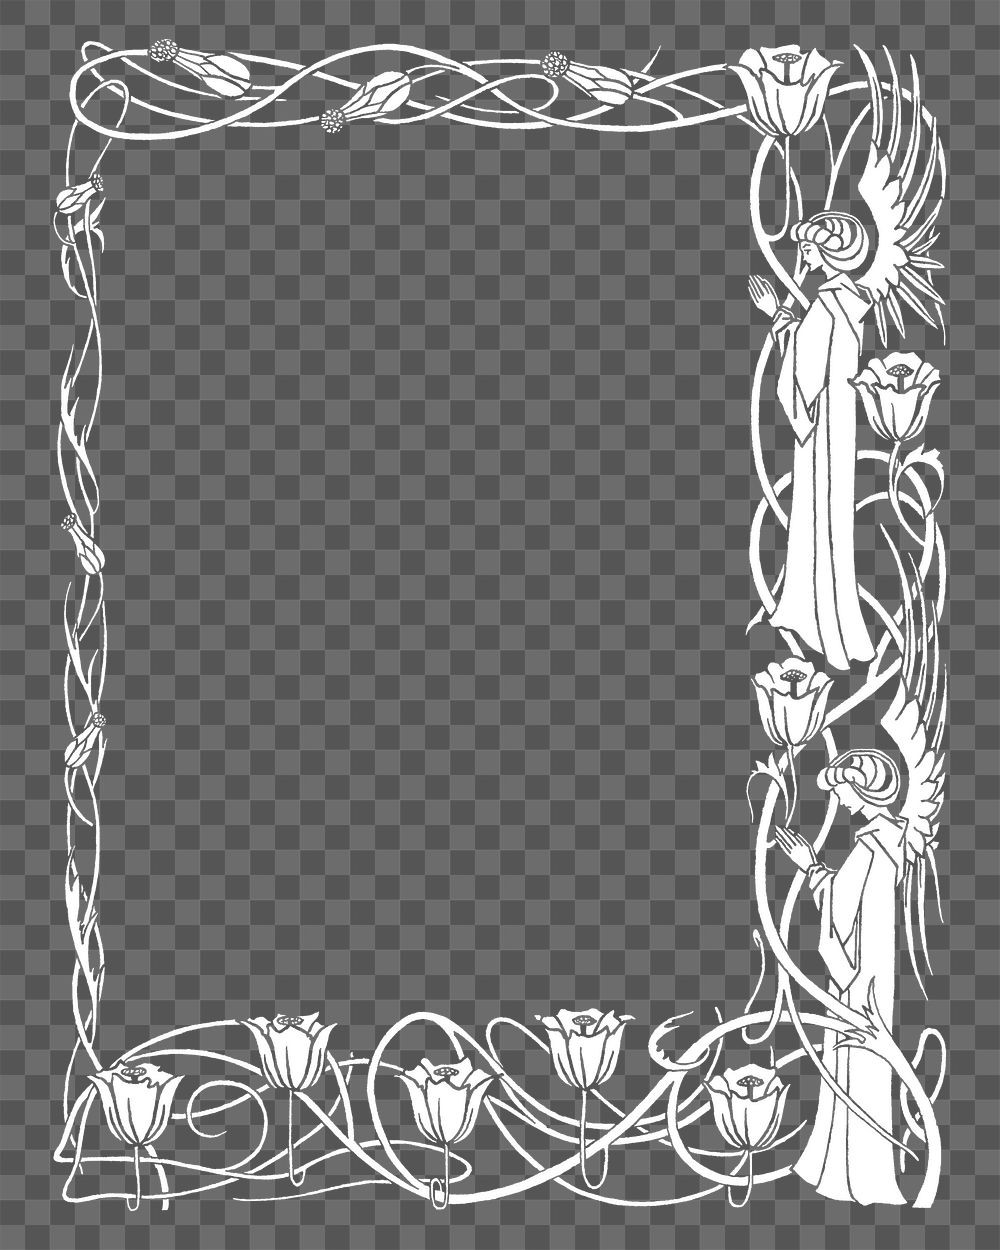 Flourish frame png transparent background. Remixed by rawpixel.